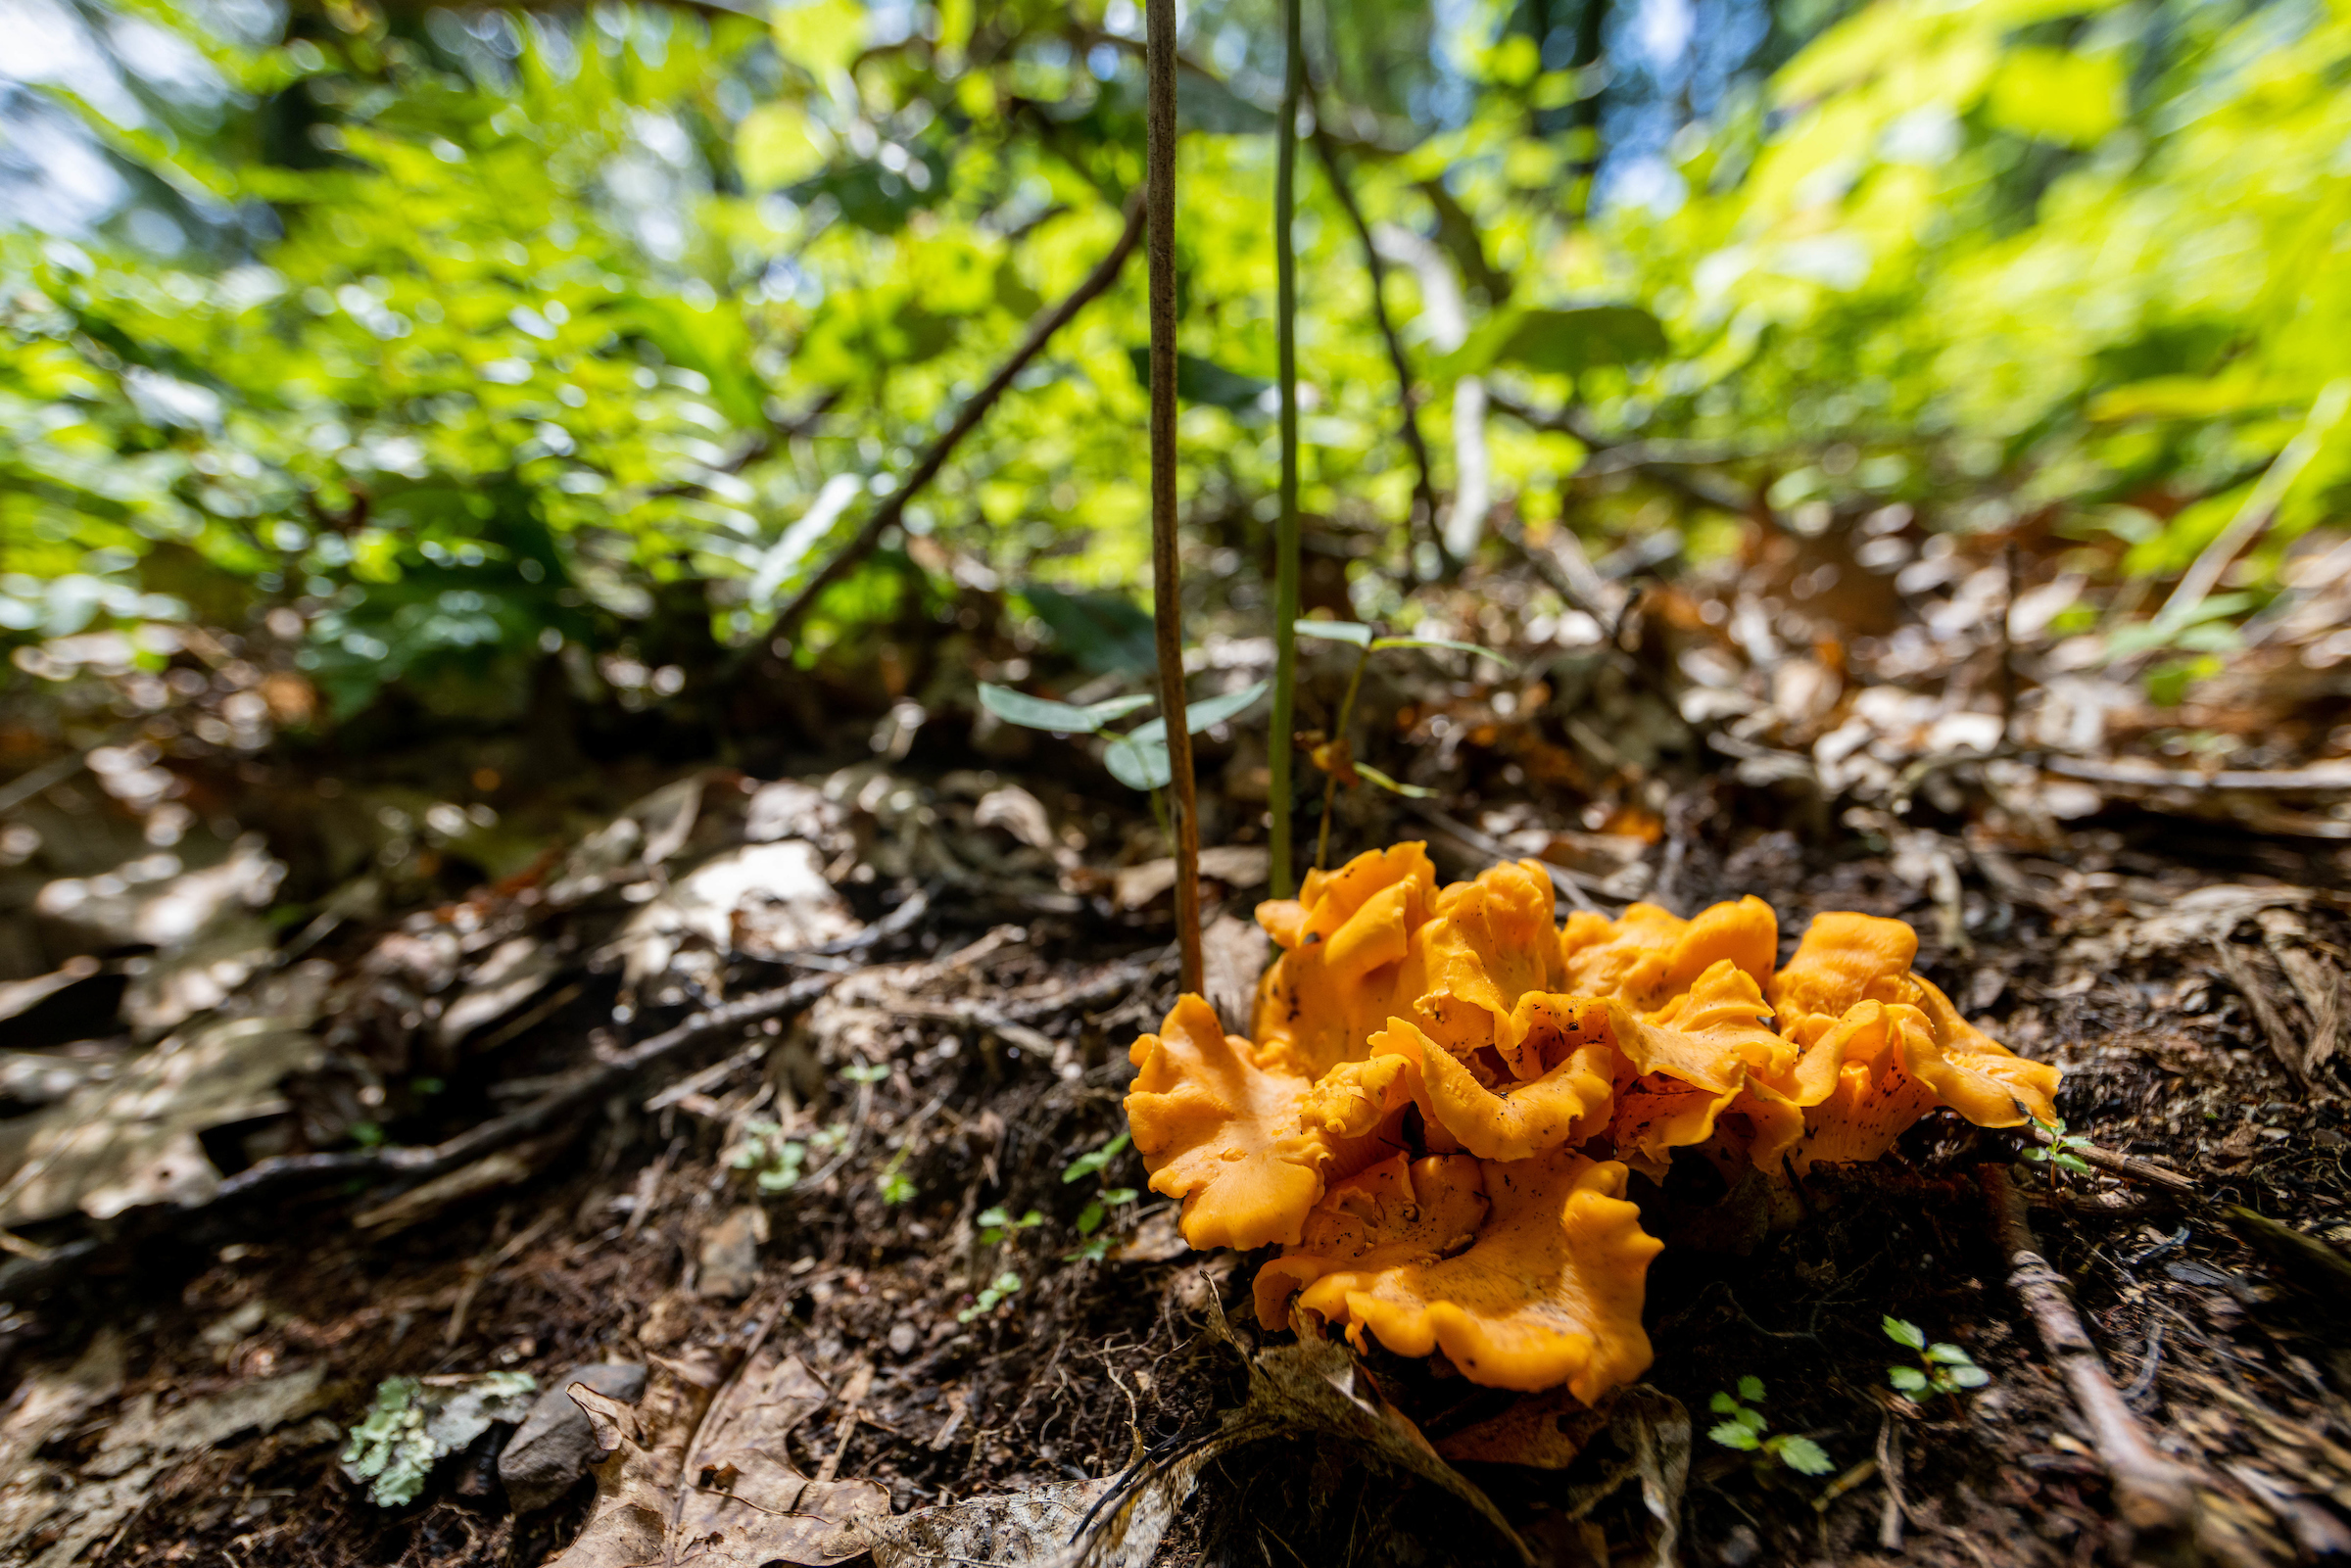 A bright orange chanterelle mushroom grows in an open patch of leaf litter shaded by green fern fronds.